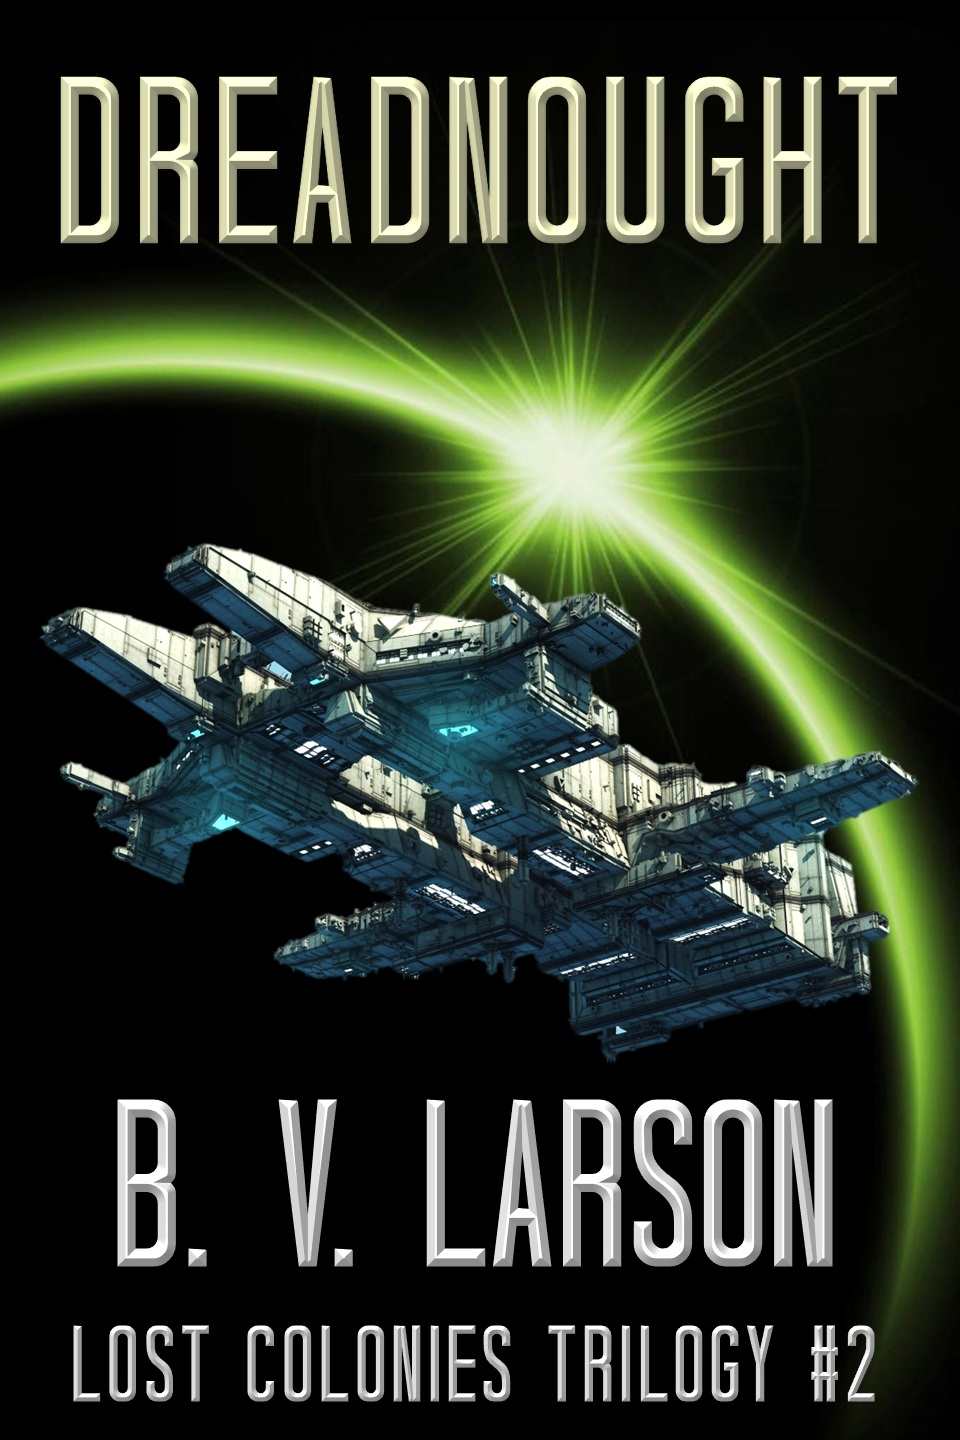 Dreadnought (Lost Colonies Trilogy Book 2) by B. V. Larson